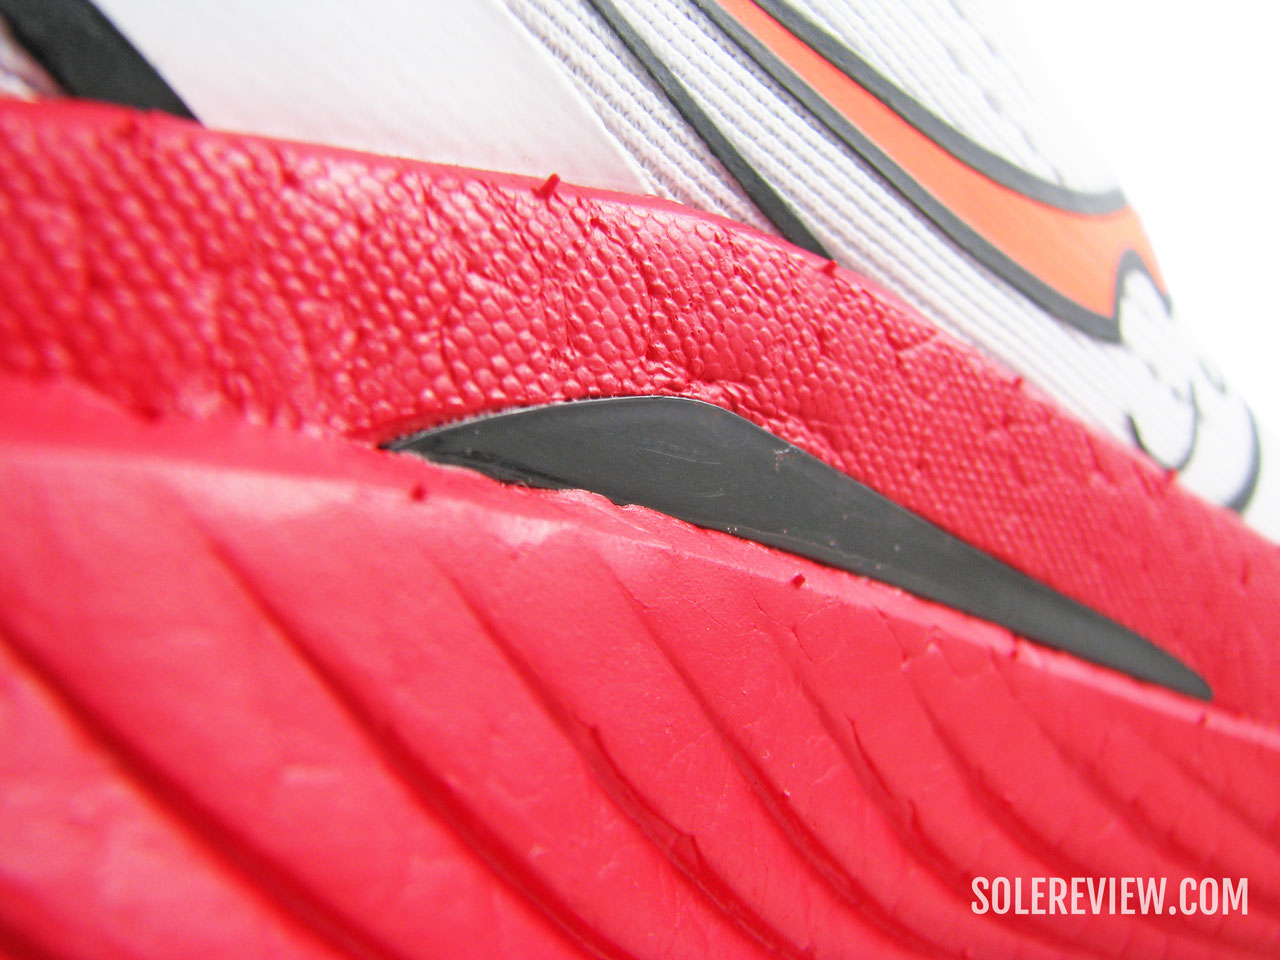 The winged Nylon plate of the Saucony Endorphin Speed 3.